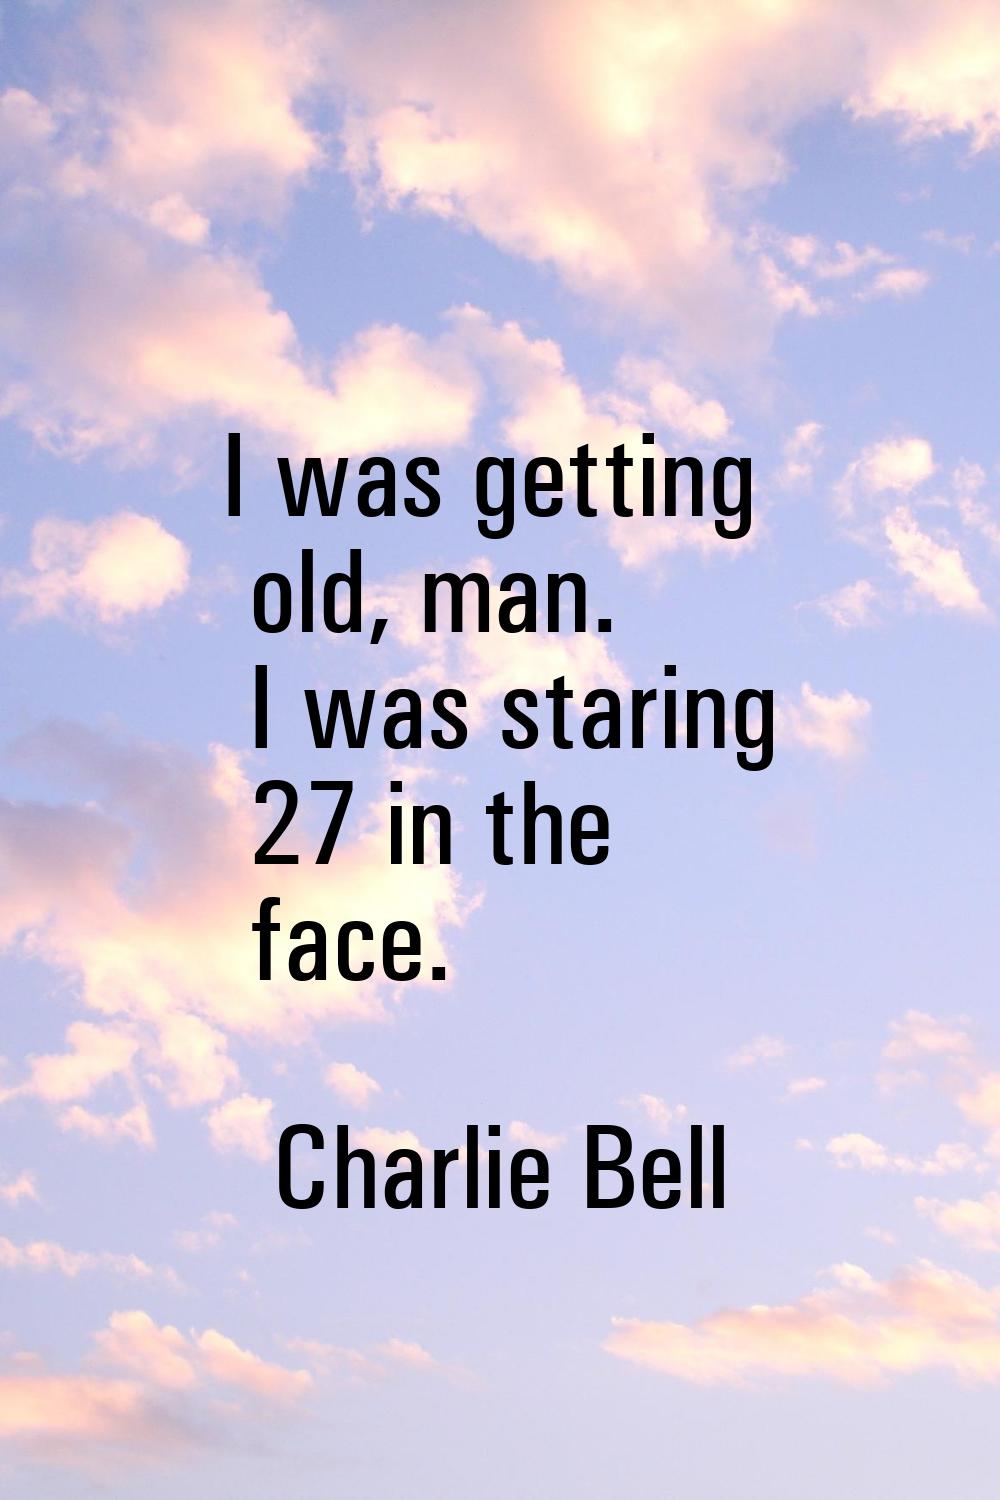 I was getting old, man. I was staring 27 in the face.